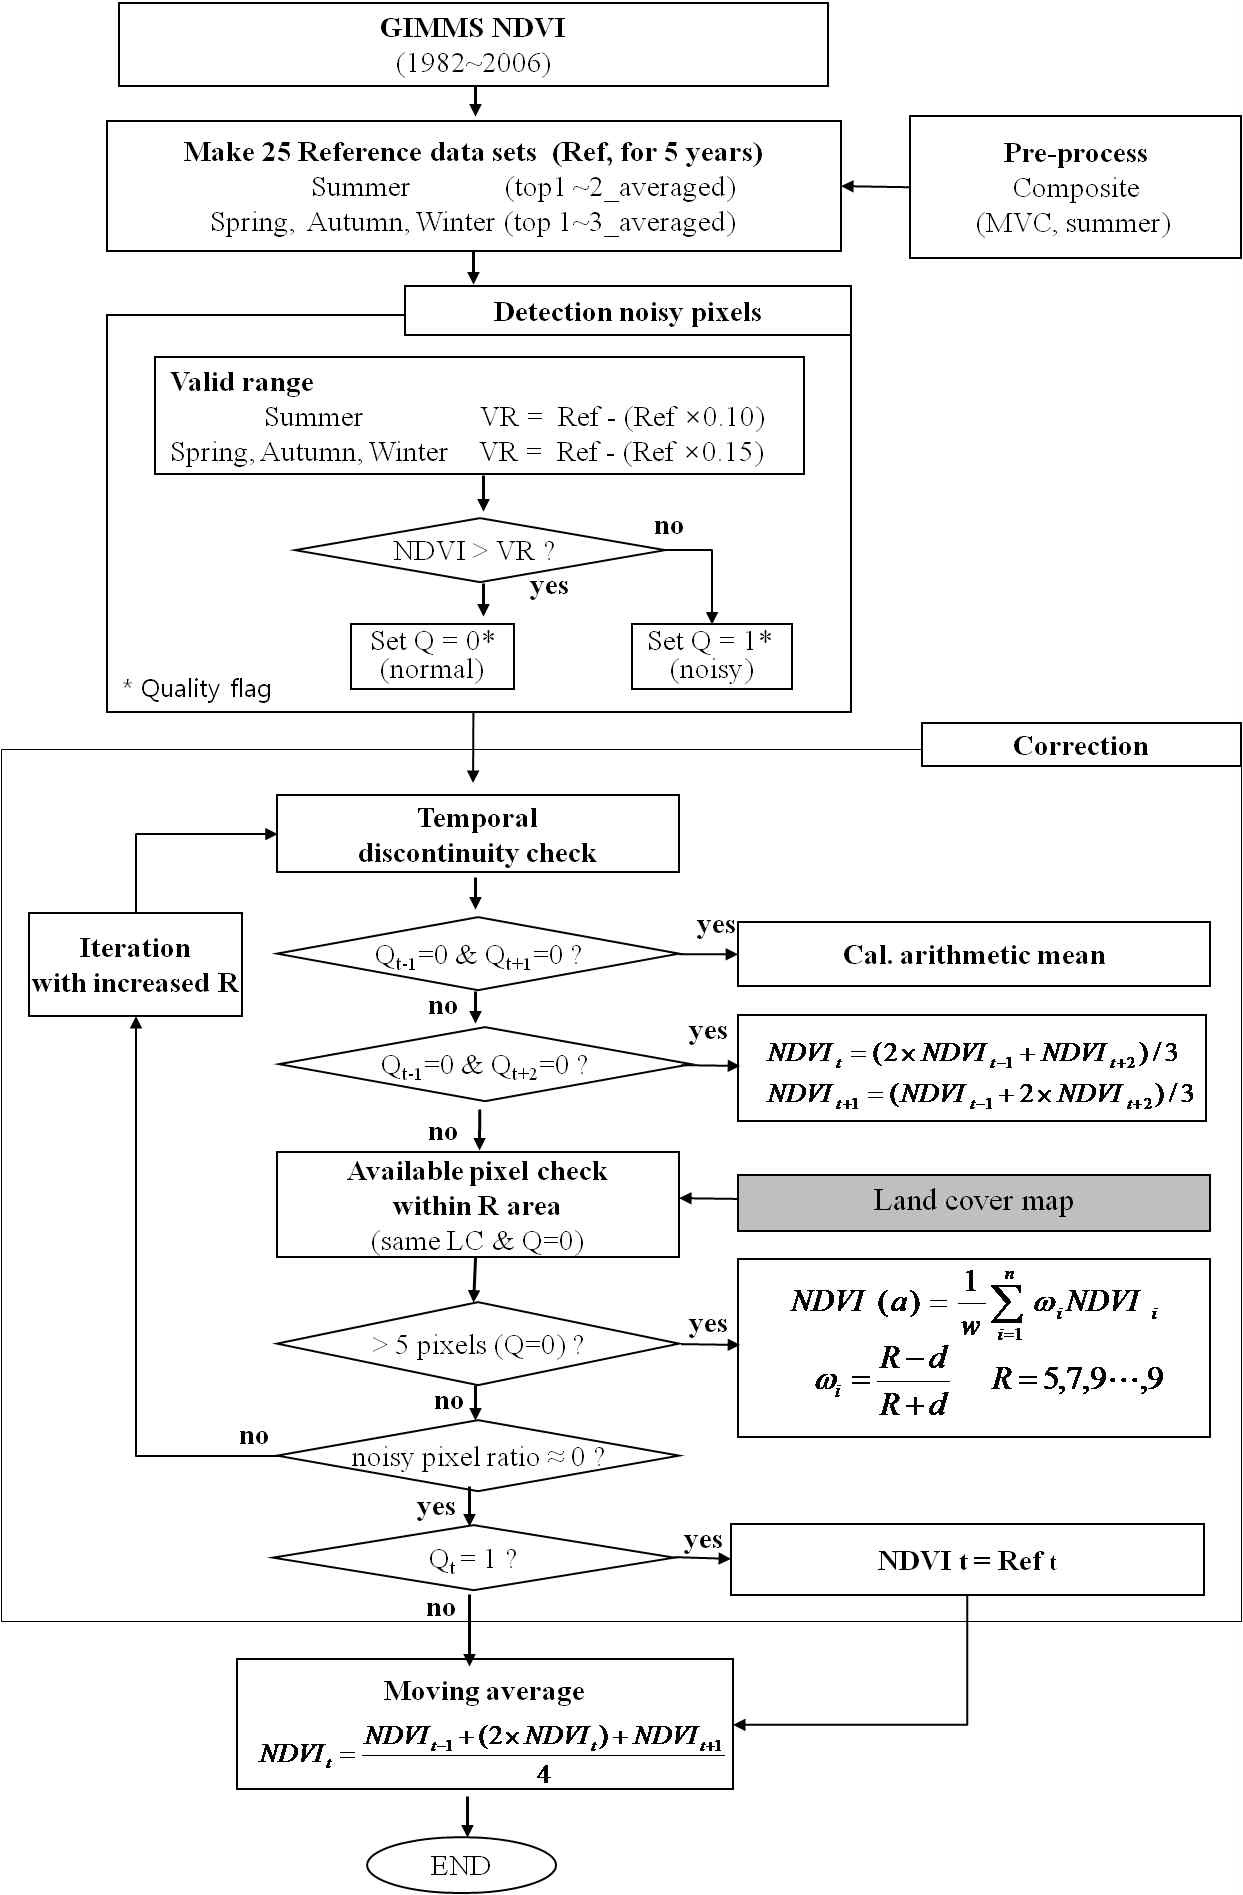 Fig. 3.2.5. Flowchart for the detection and correction process of noisy pixels embedded in the GIMMS NDVI data based on the spatio-temporal continuity